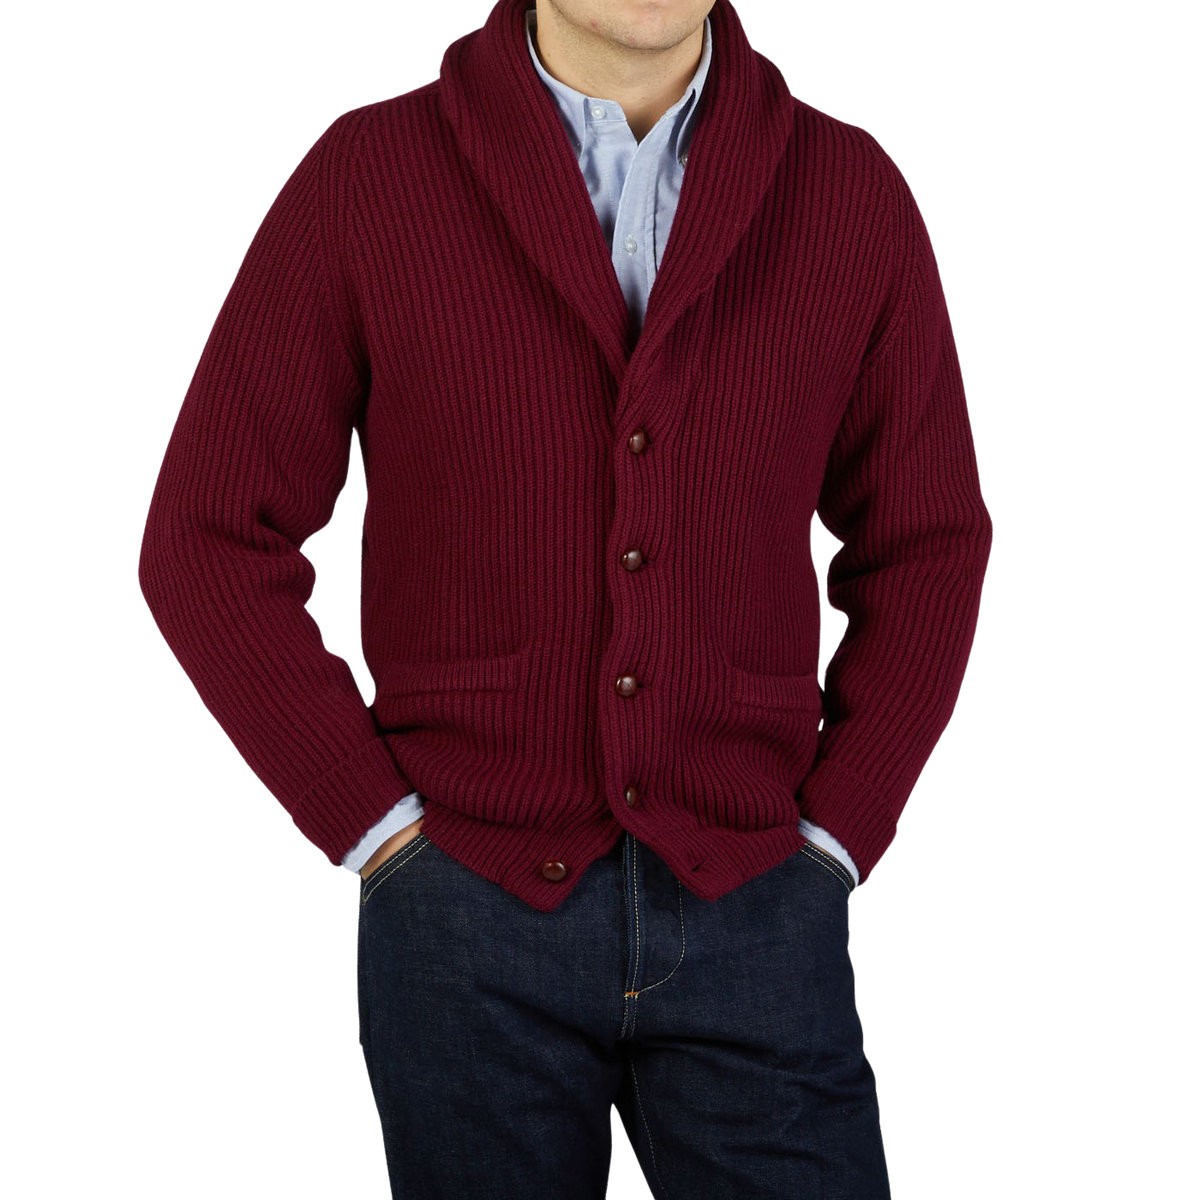 A man wearing a Bordeaux Lambswool Shawl Collar Cardigan by William Lockie and jeans.